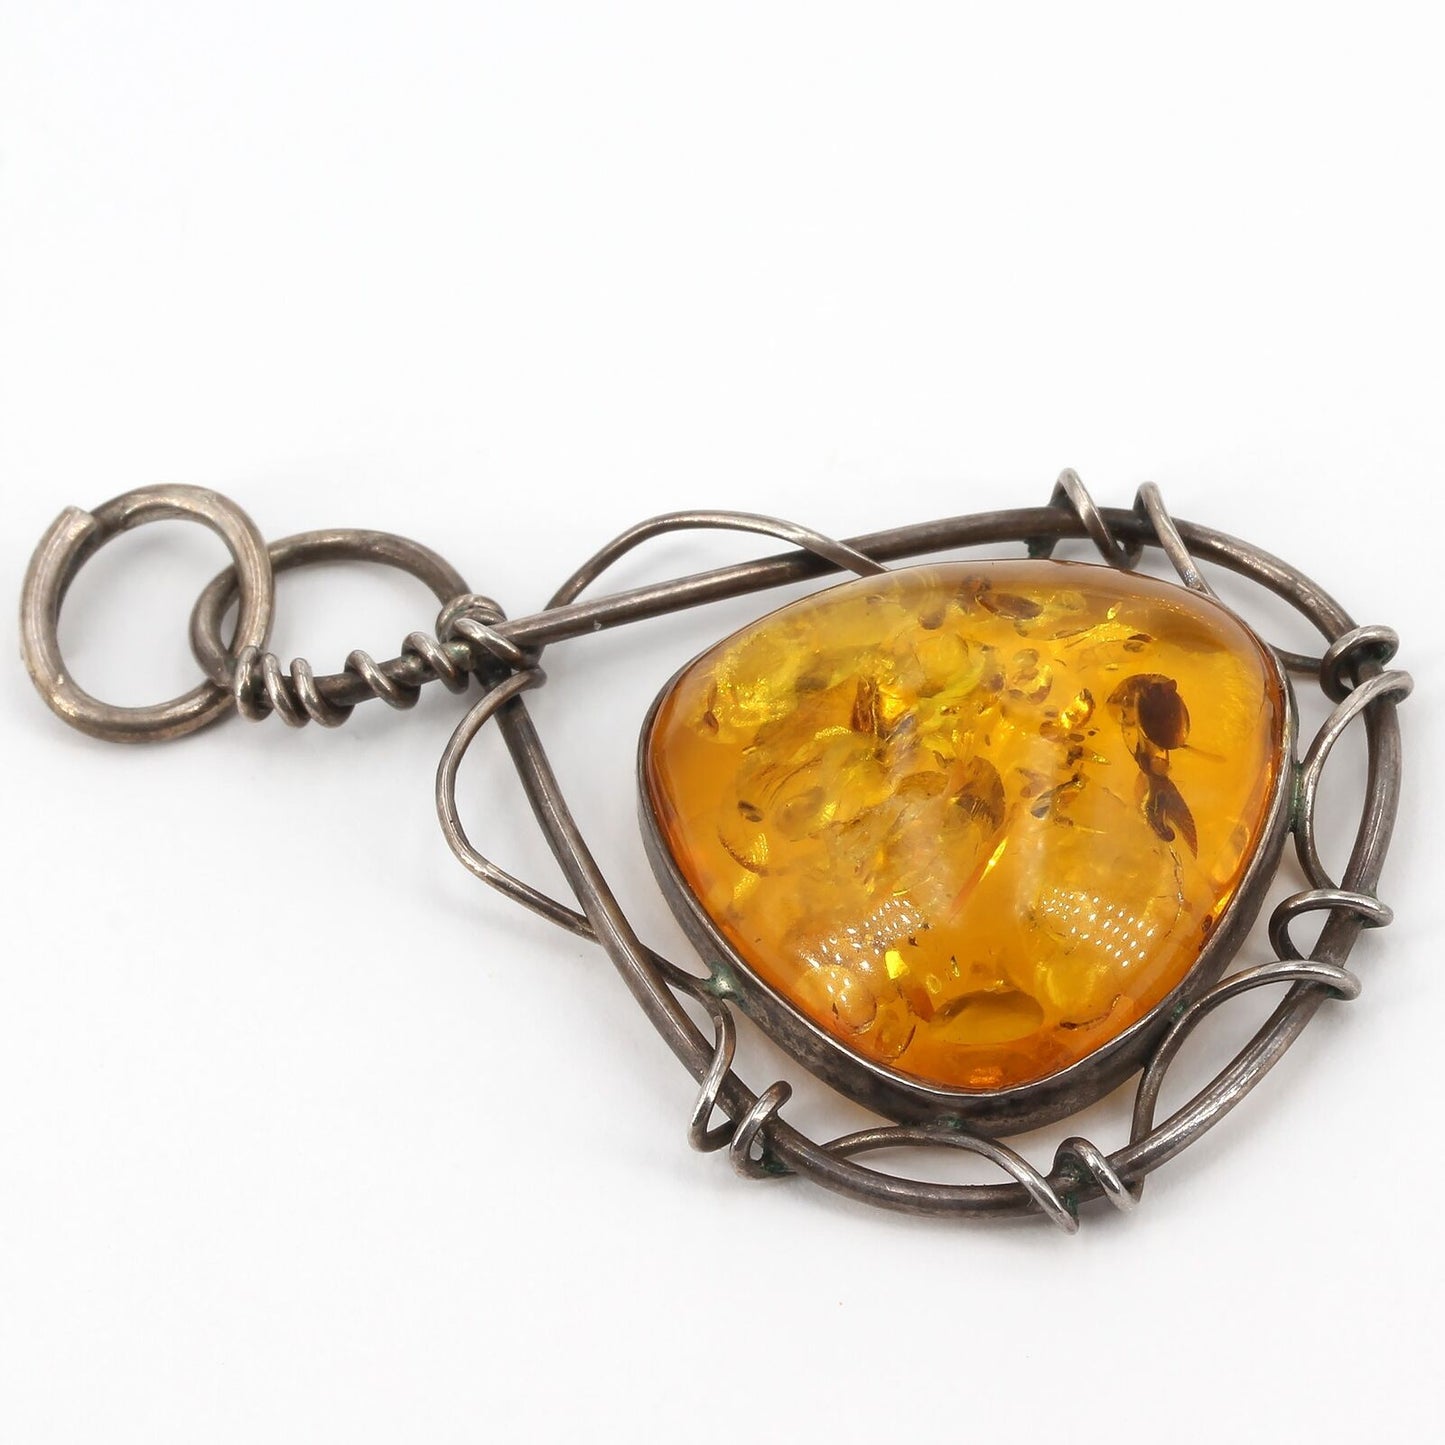 Vintage Silpada Handmade Sterling Wire Wrapped Amber FIRE WITHIN Pendant S0997